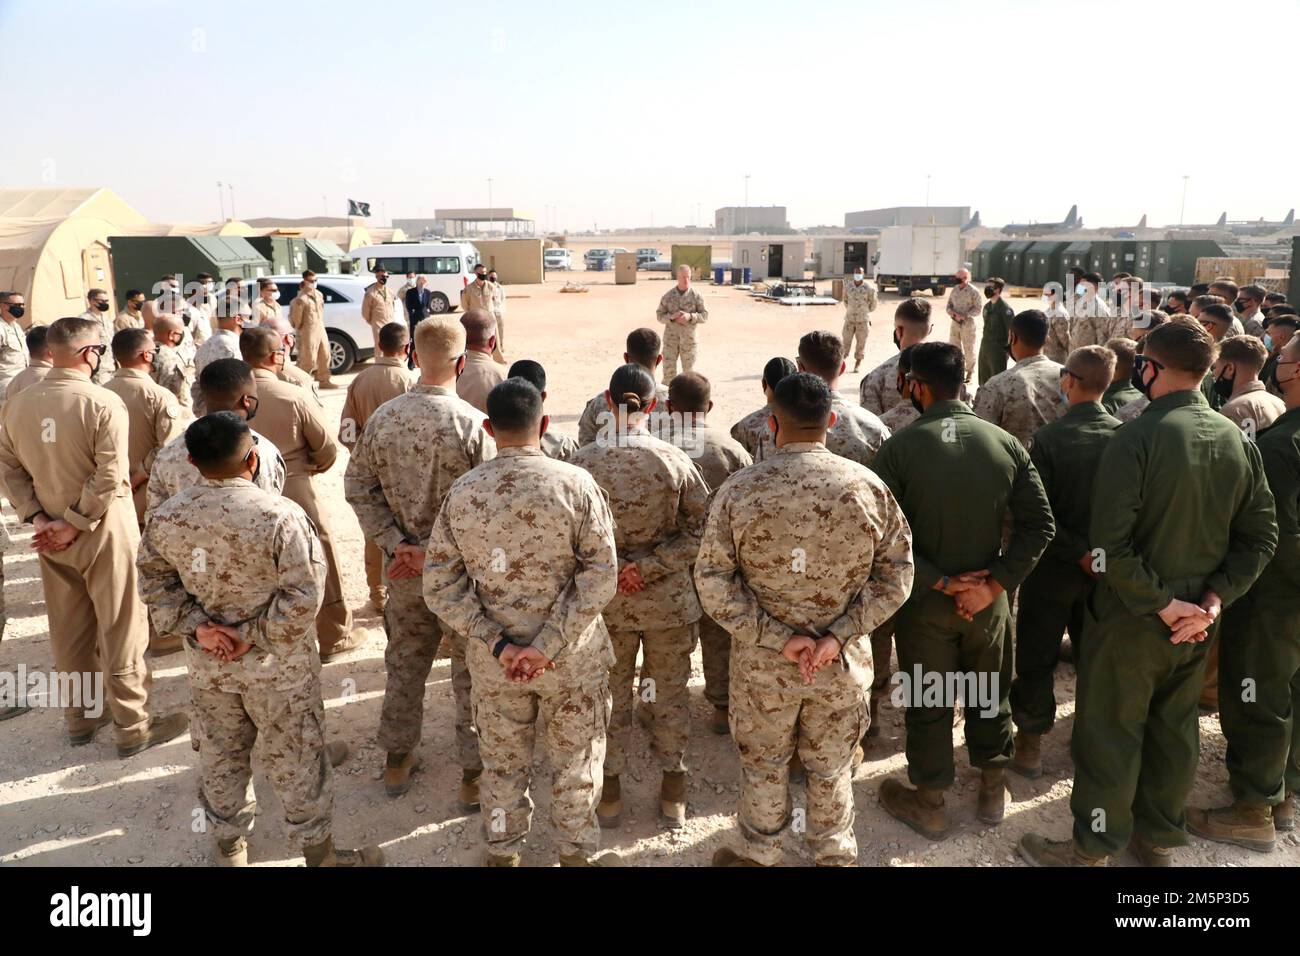 U.S. Marine Corps Maj. Gen. Paul Rock, Commander, U.S. Marine Corps Forces Central Command speaks with Marines with Marine Fighter Attack Squadron 115 (VMFA-115) during his visit to Prince Sultan Air Base, Kingdom of Saudi Arabia on Feb. 27, 2022. VMFA-115 has been deployed to Prince Sultan Air Base in the Kingdom of Saudi Arabia since December 2021 and are an integral part of the Immediate Response Force in the Central Command area of responsibility. Stock Photo